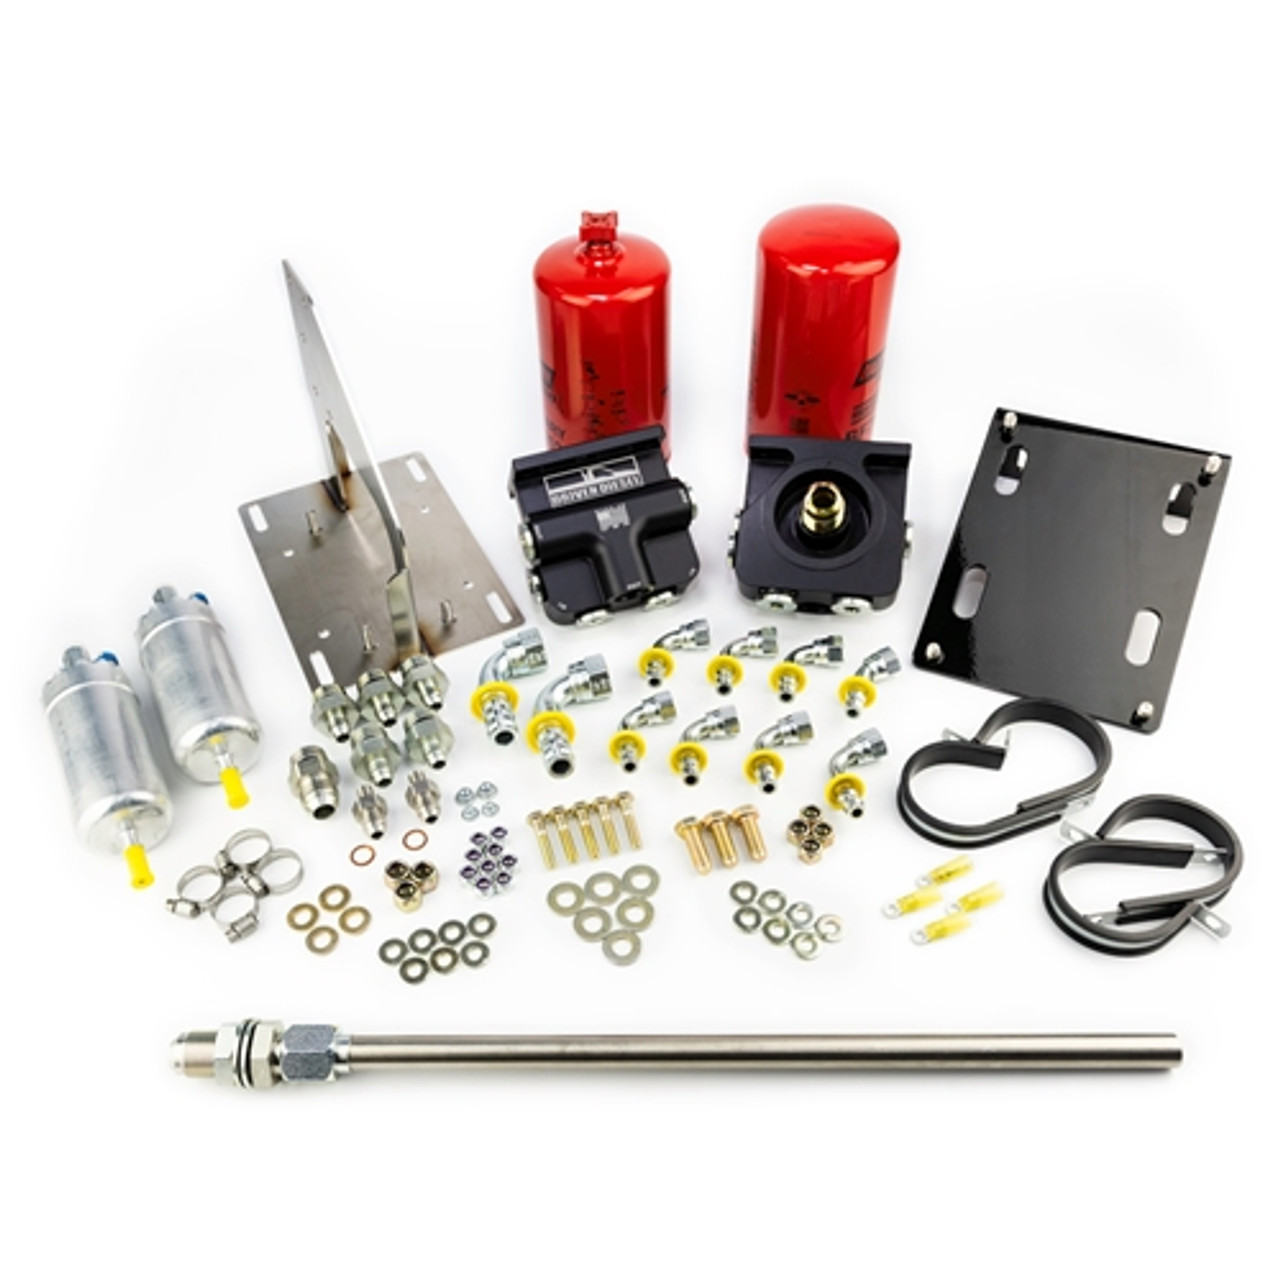  Driven Diesel SD High Volume Fuel Delivery Kit (DUAL BOSCH : 5/8 PICKUP) for 1999 to 2007 Ford 7.3/6.0L Powerstroke (DD-SD-HVFDK-2P-58-V2) Kit View